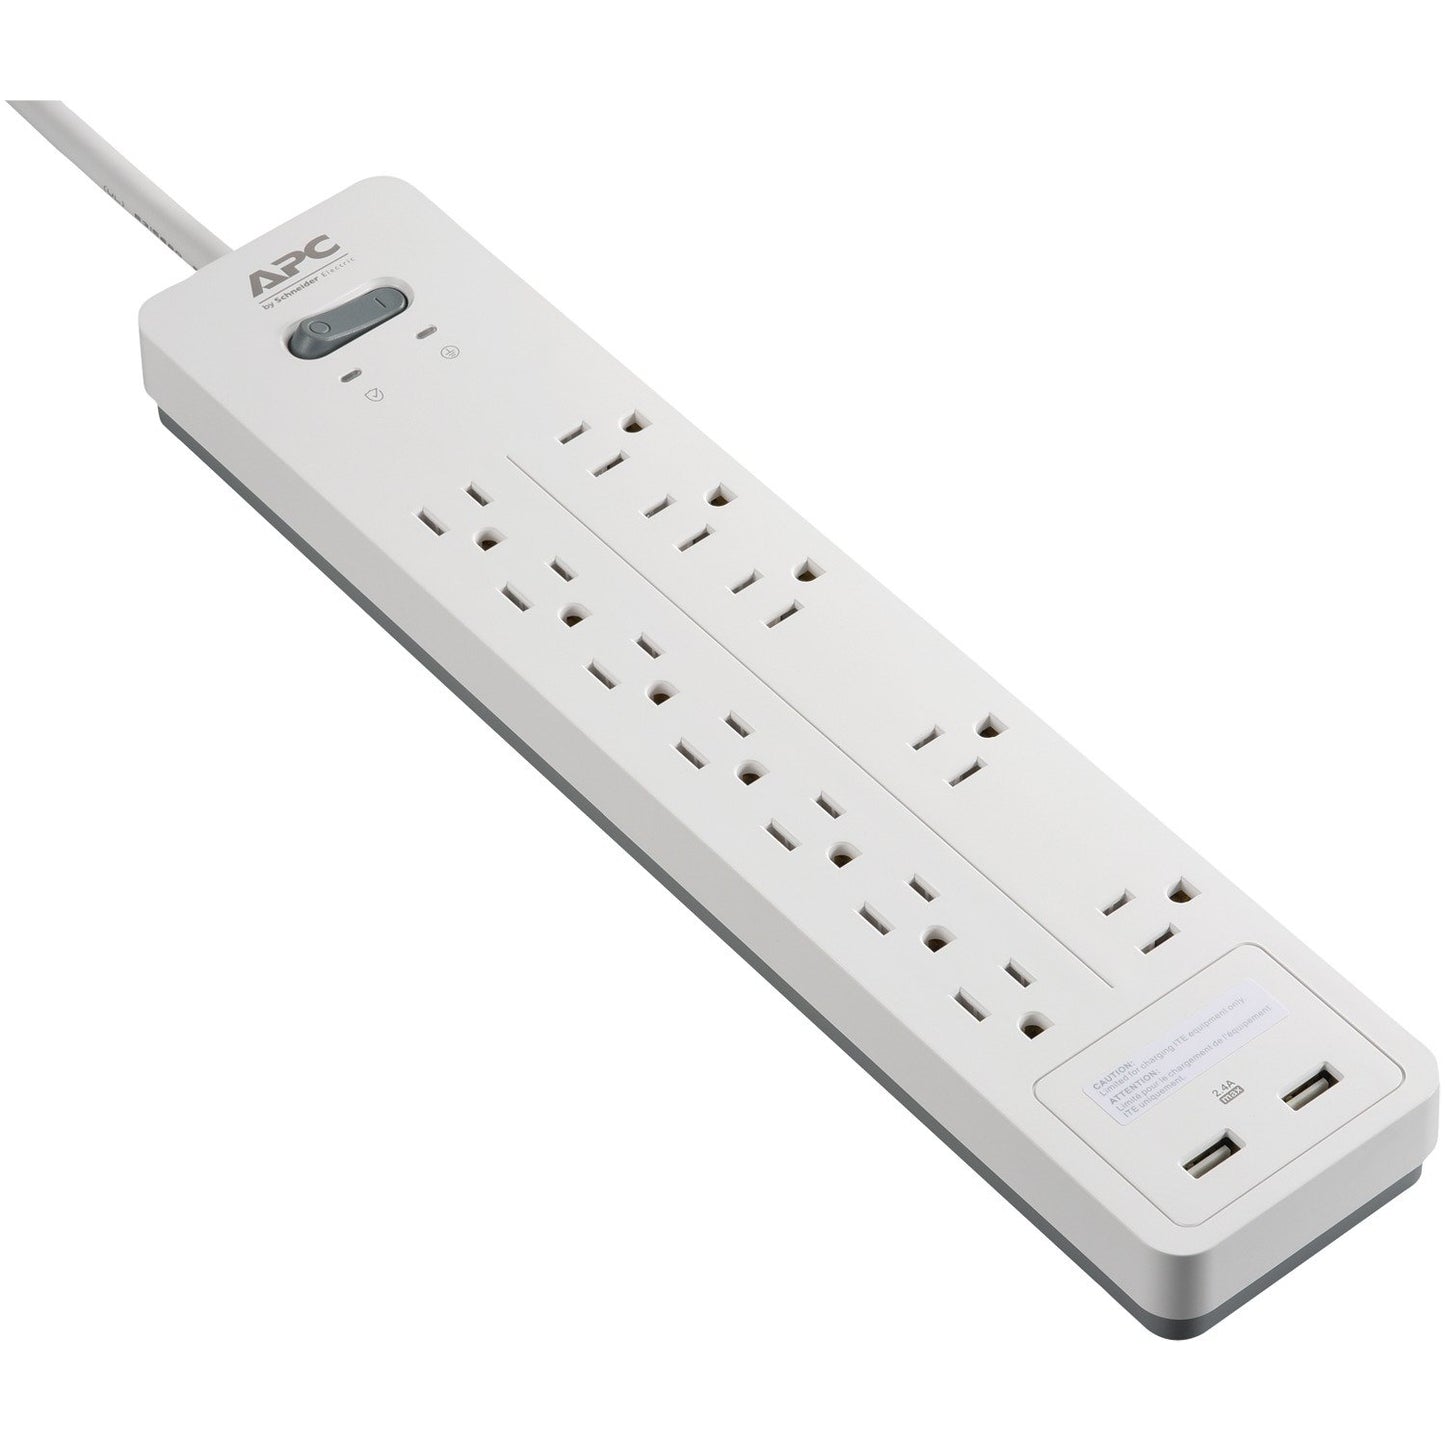 APC PH12U2W Home Office SurgeArrest® 12-Outlet Power Strip with 2 USB Ports